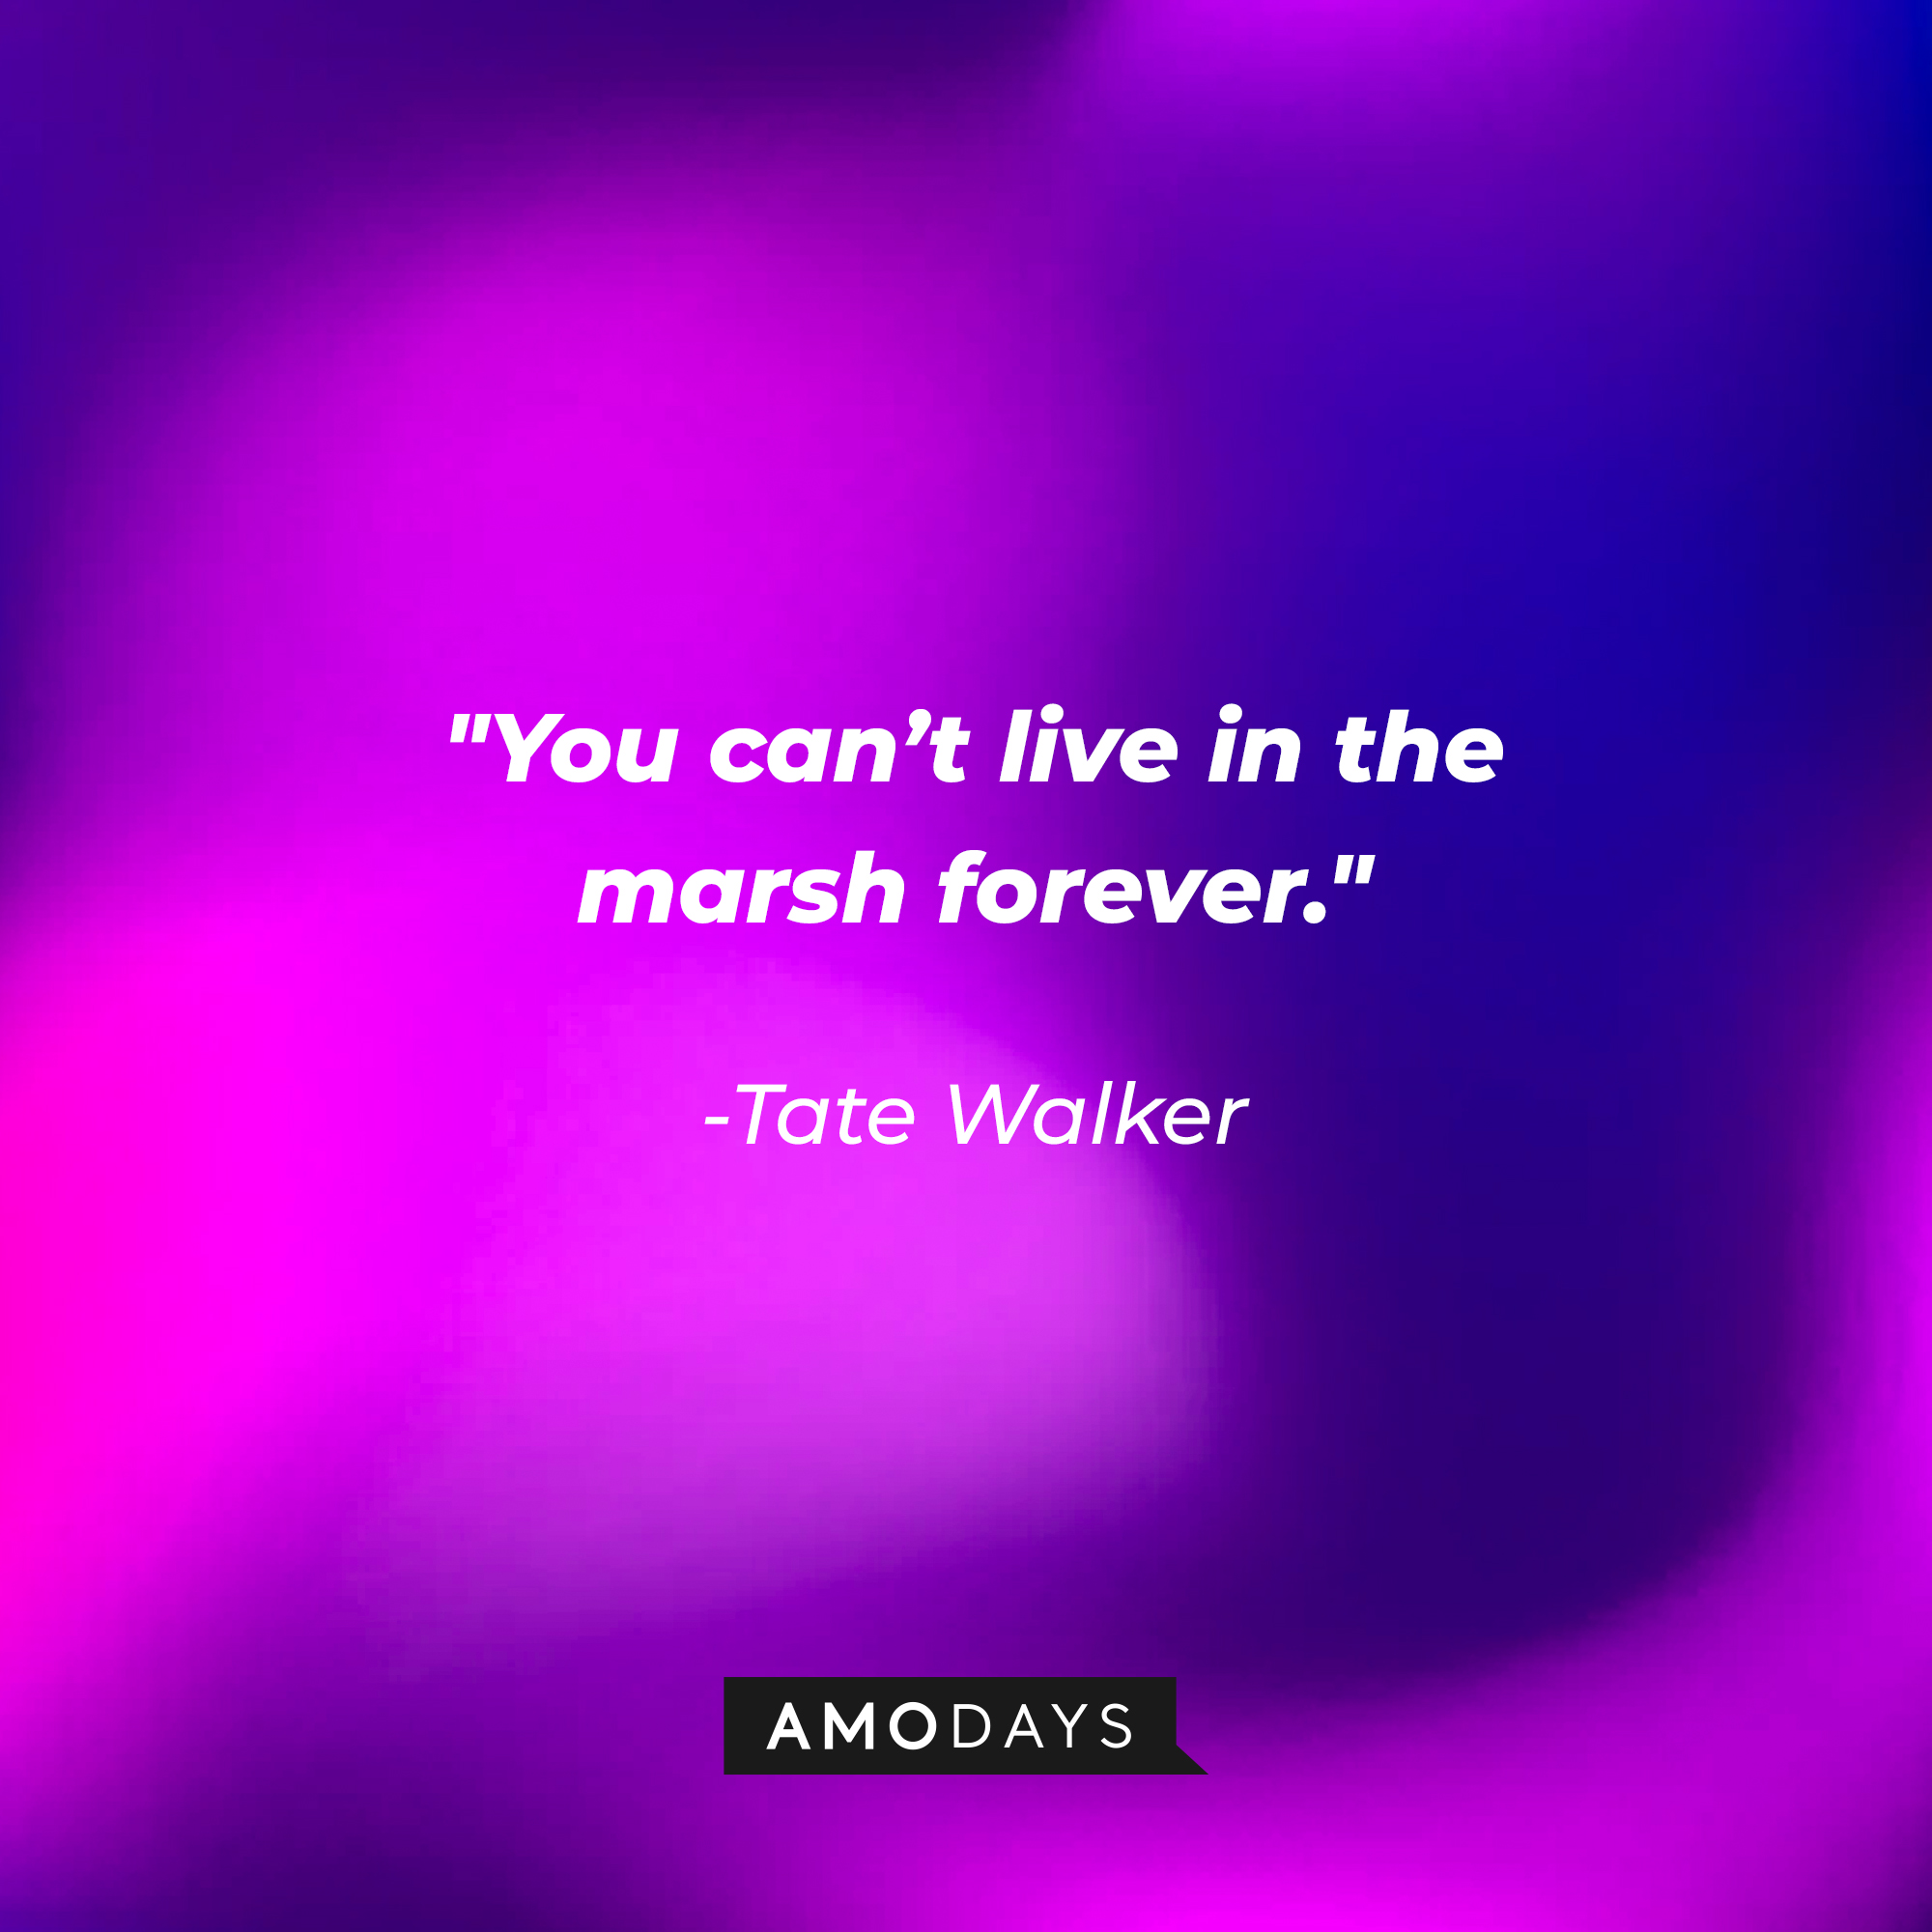 Tate Walker’s quote: “You can’t live in the marsh forever.” │Source: AmoDays